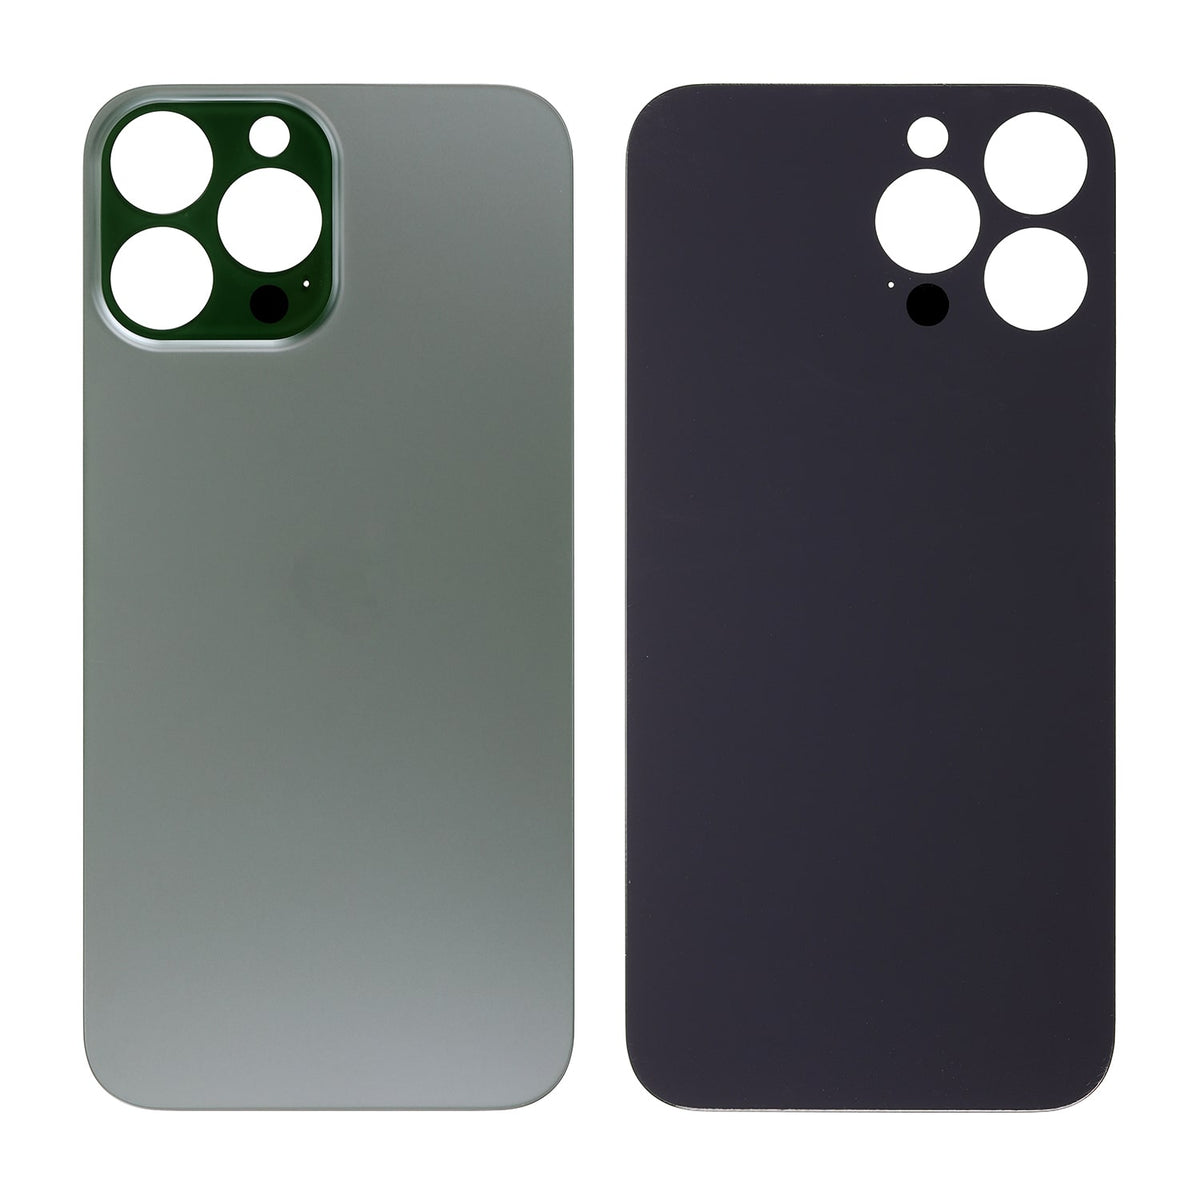 ALPINE GREEN BACK COVER GLASS FOR IPHONE 13 PRO MAX